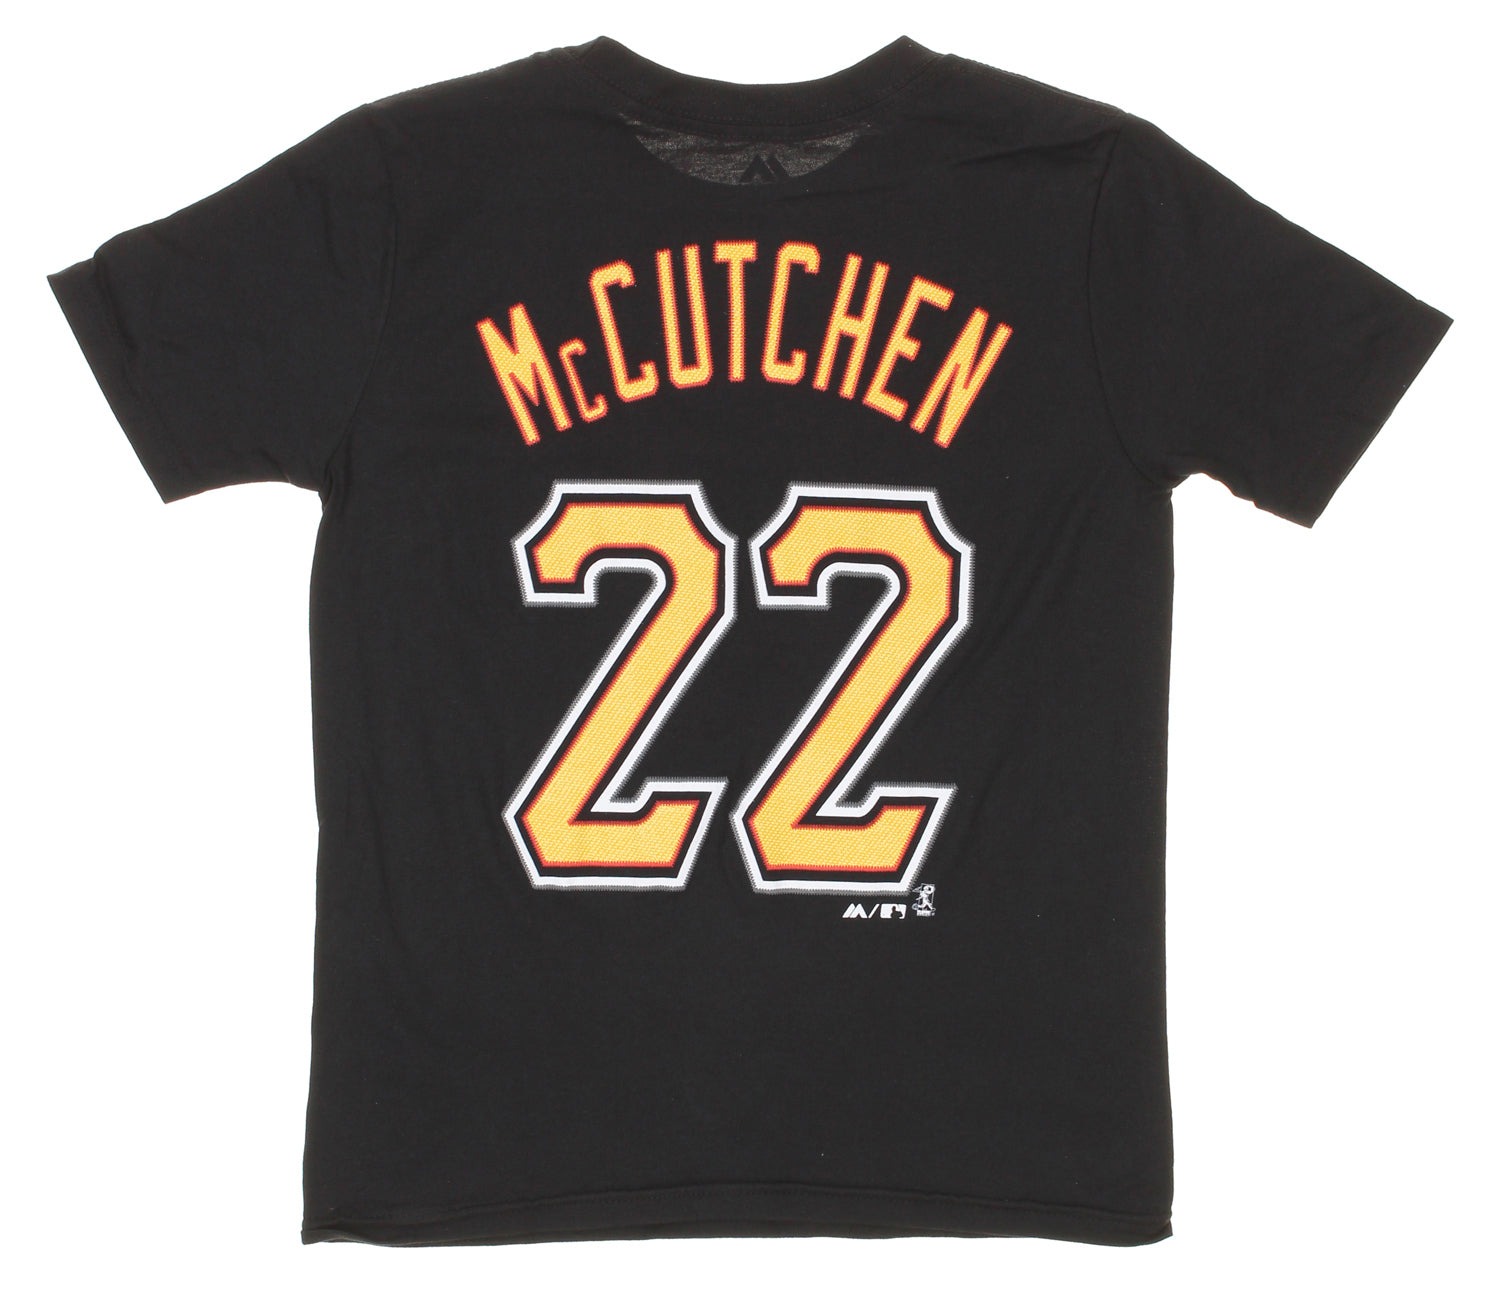 That's Andrew McCutchen's number': The Pirate who protected No. 22